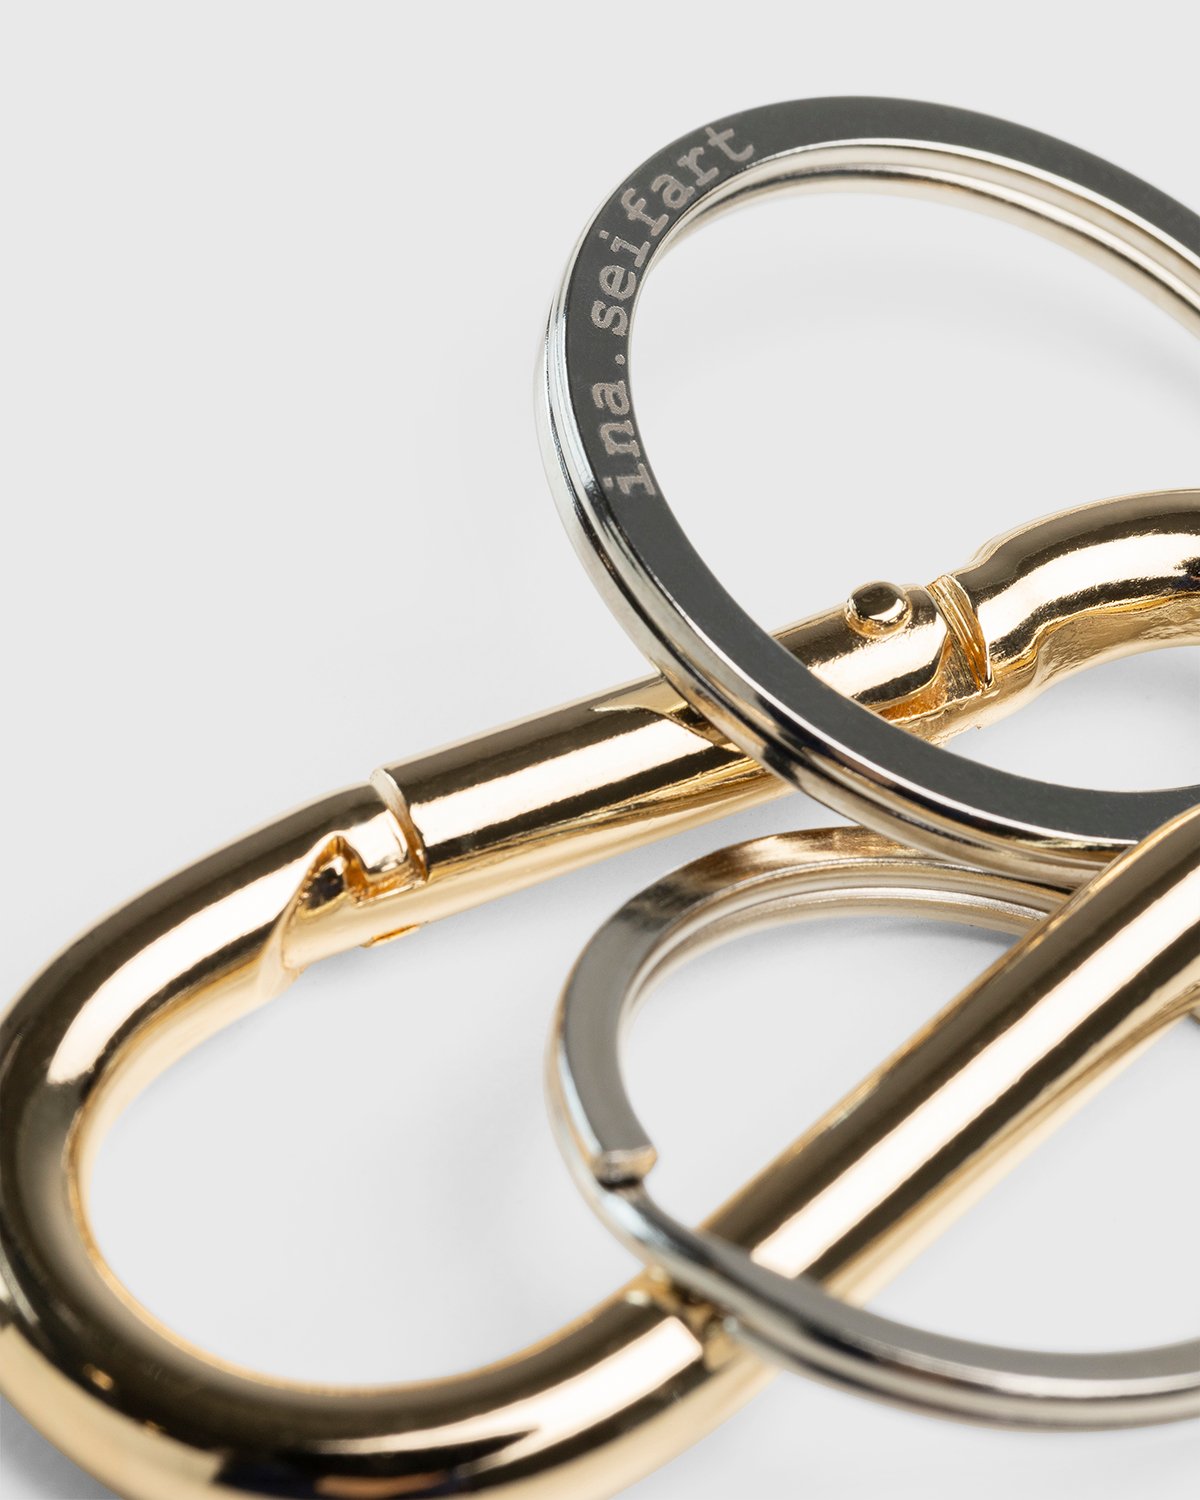 Ina Seifart - Karabiner Small Gold - Accessories - Gold - Image 2